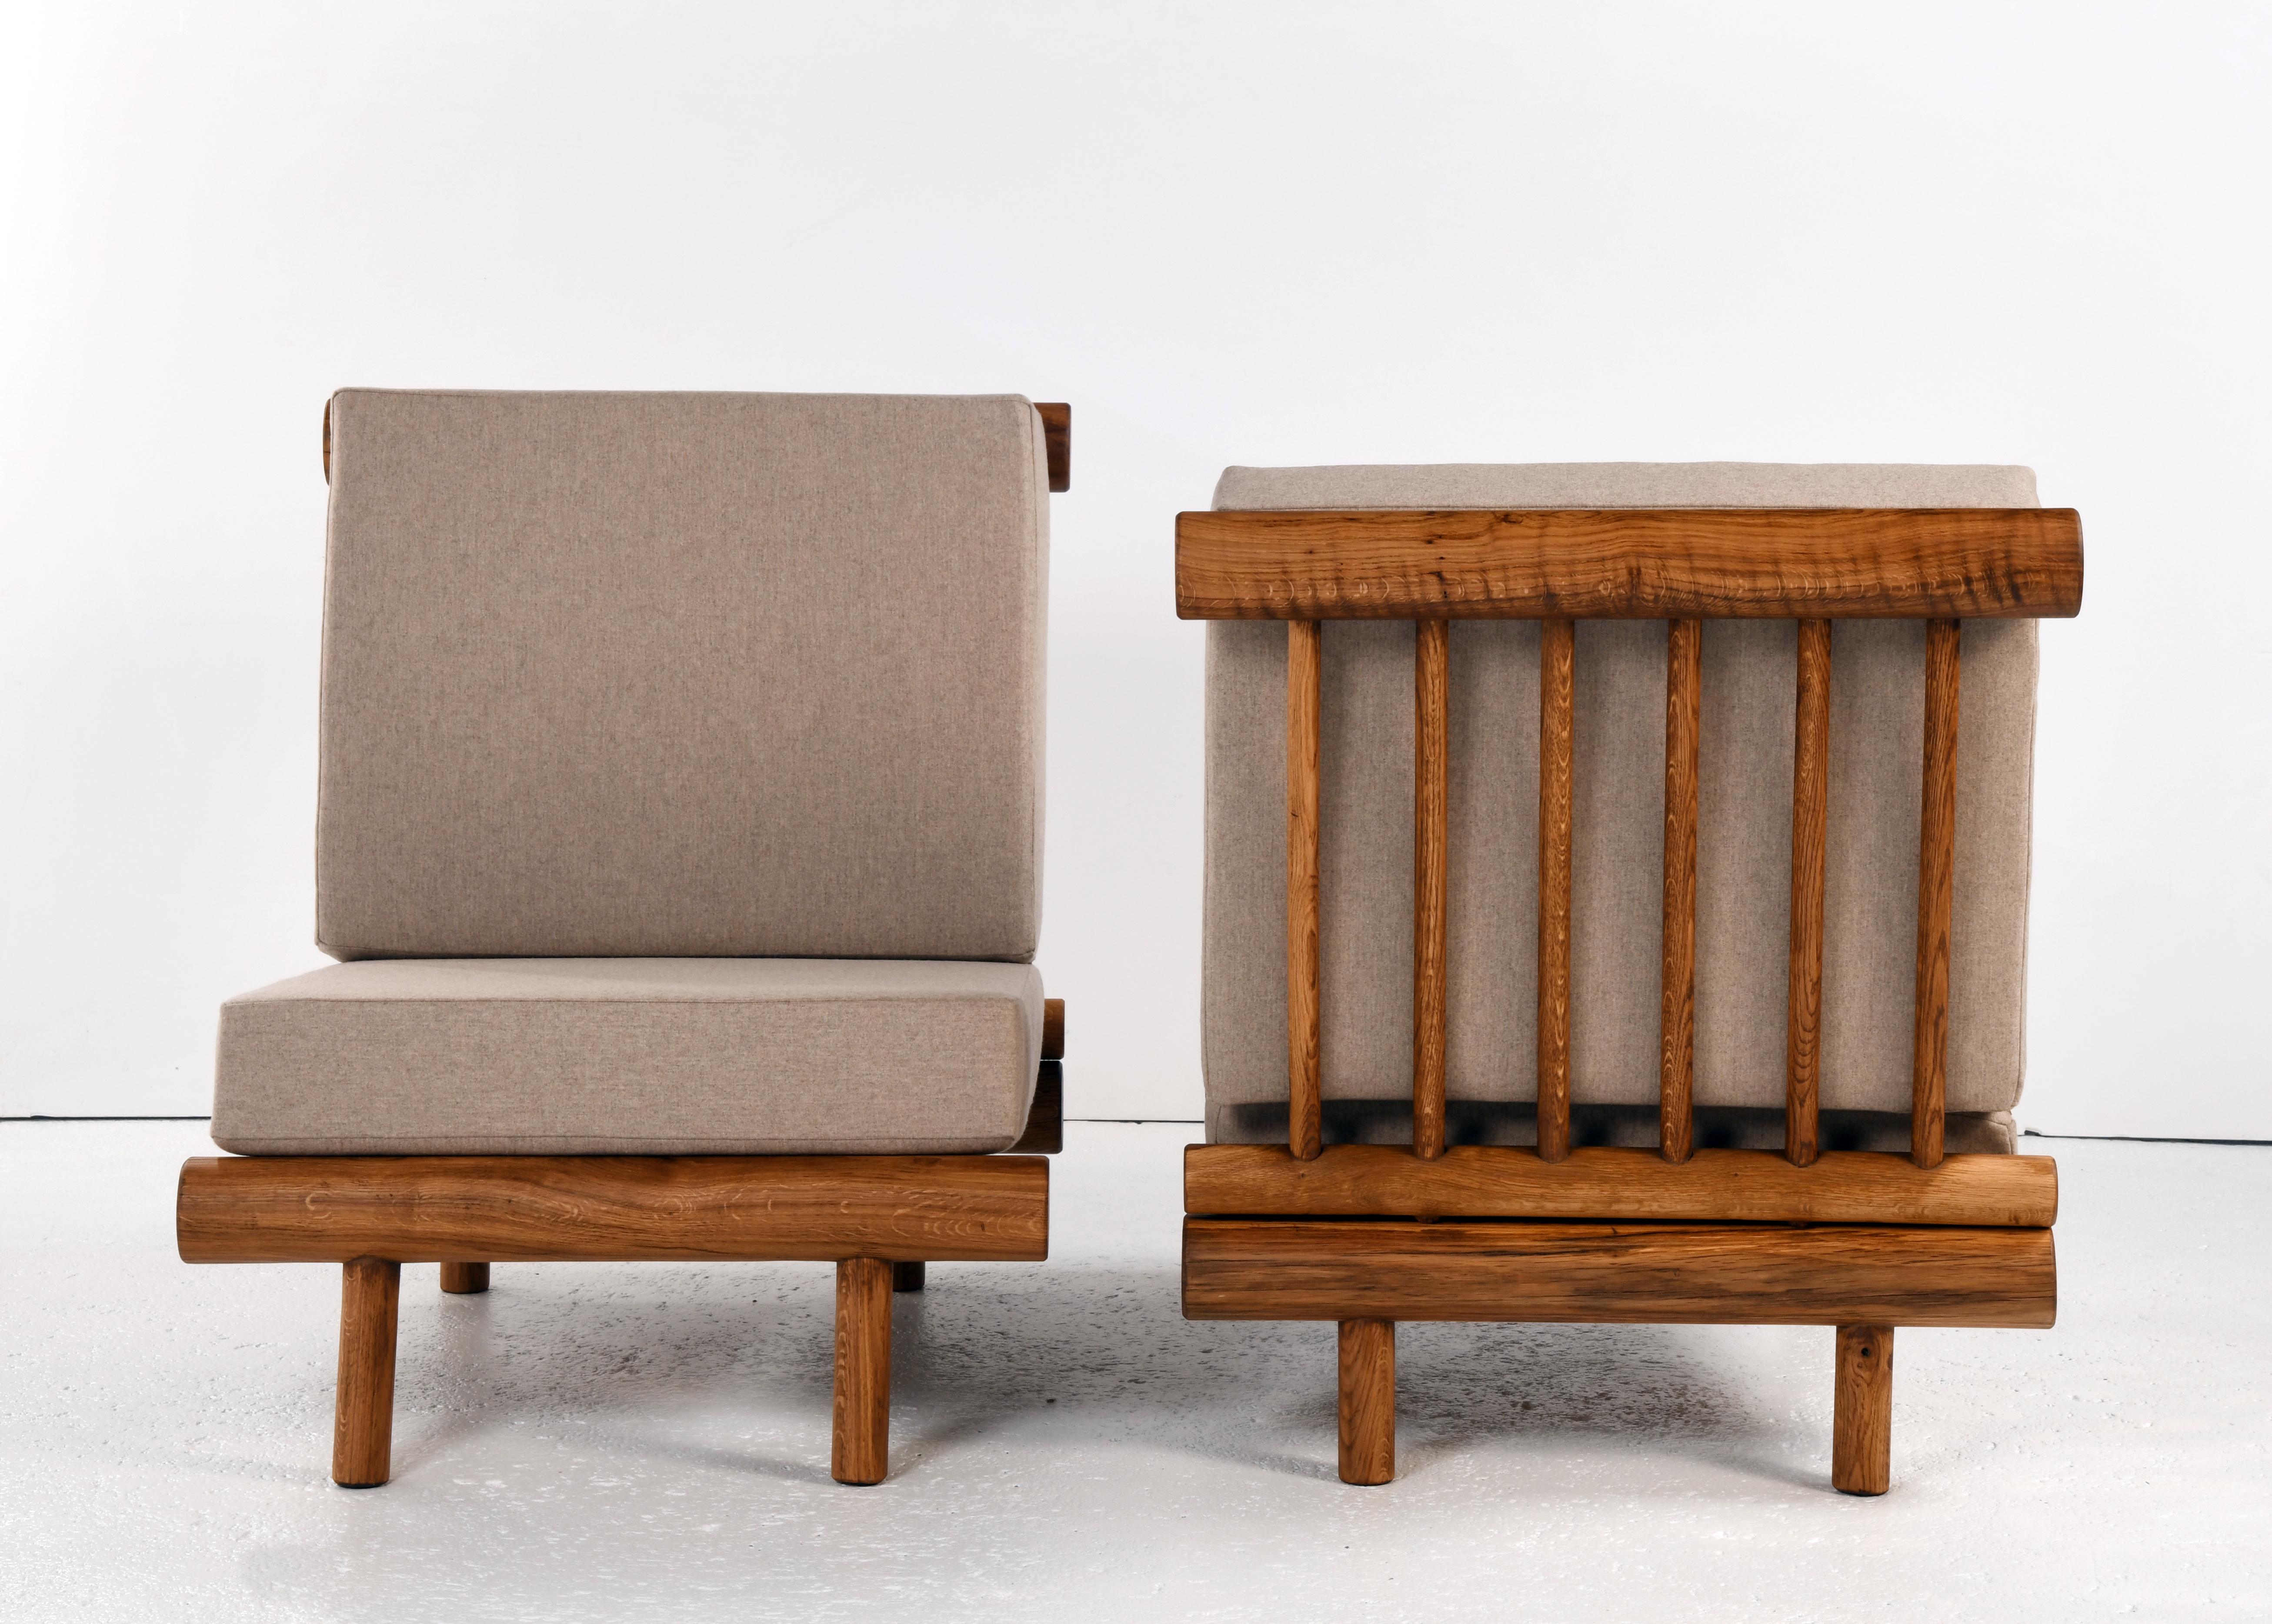 Mid-20th Century Pair of oak fireside chairs called La cachette, attributed to Charlotte Perriand